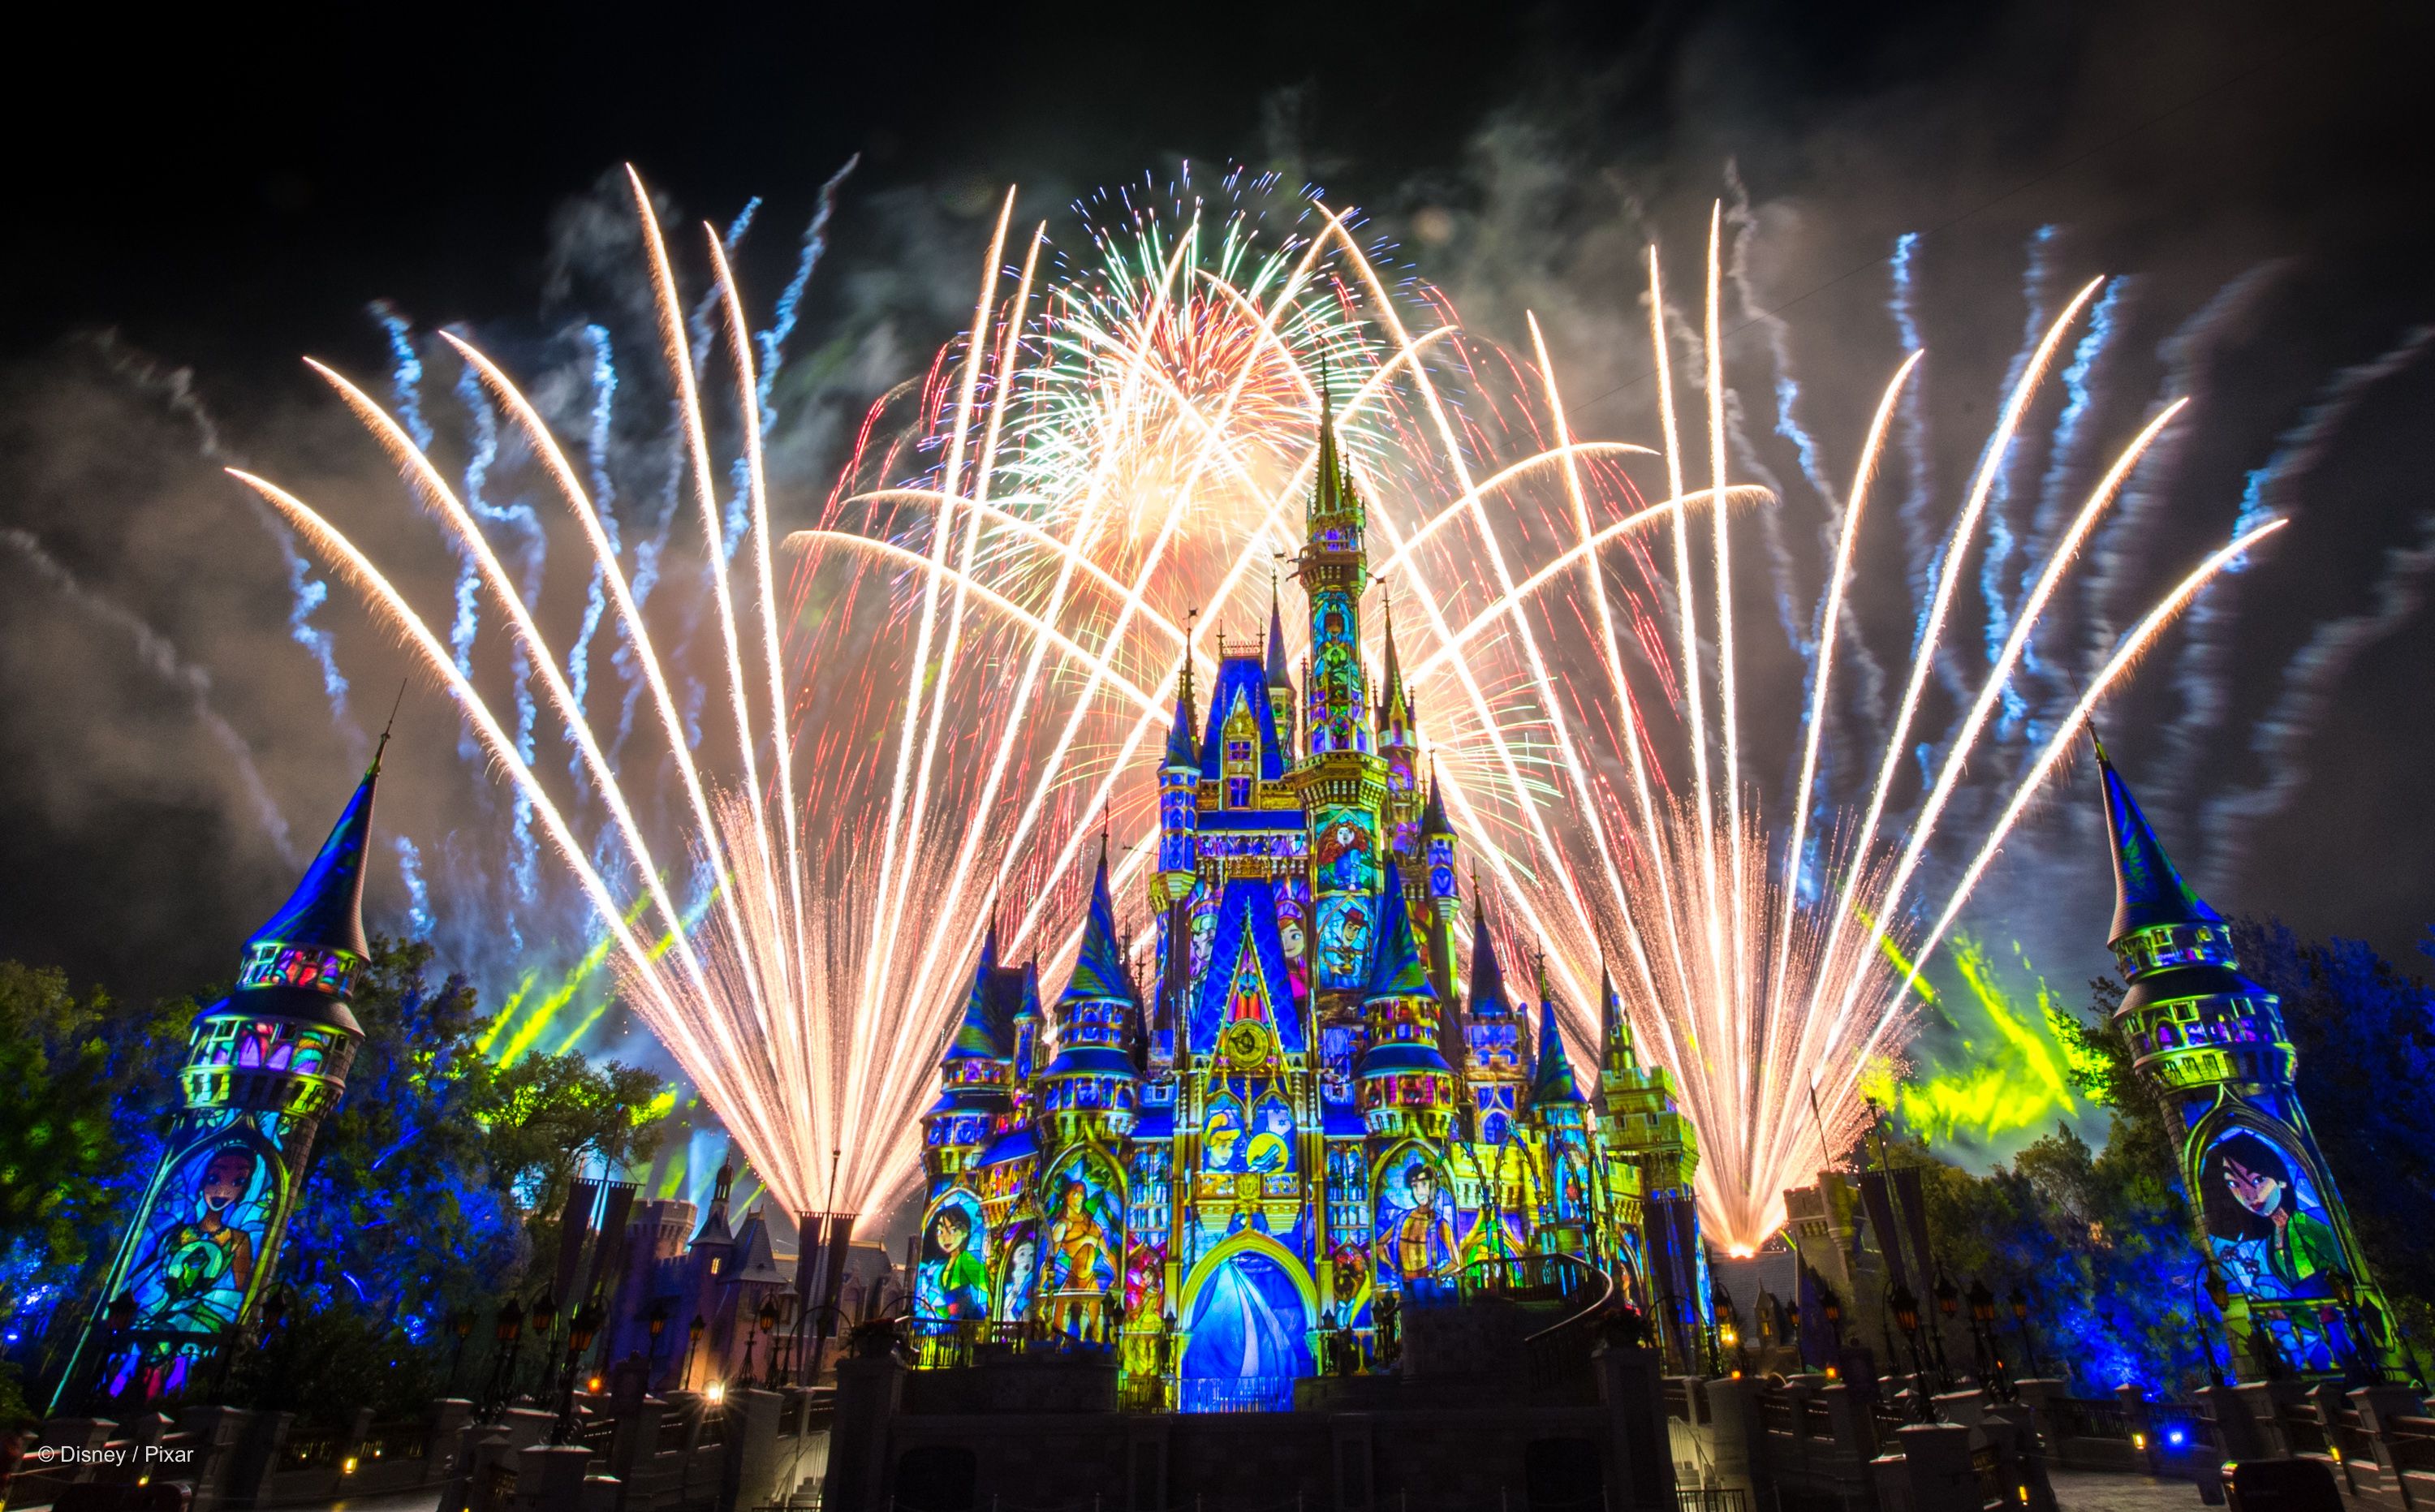 DisneyMagicMoments: Virtual Viewing of 'Happily Ever After' at Walt Disney World Resort. Disney Parks Blog